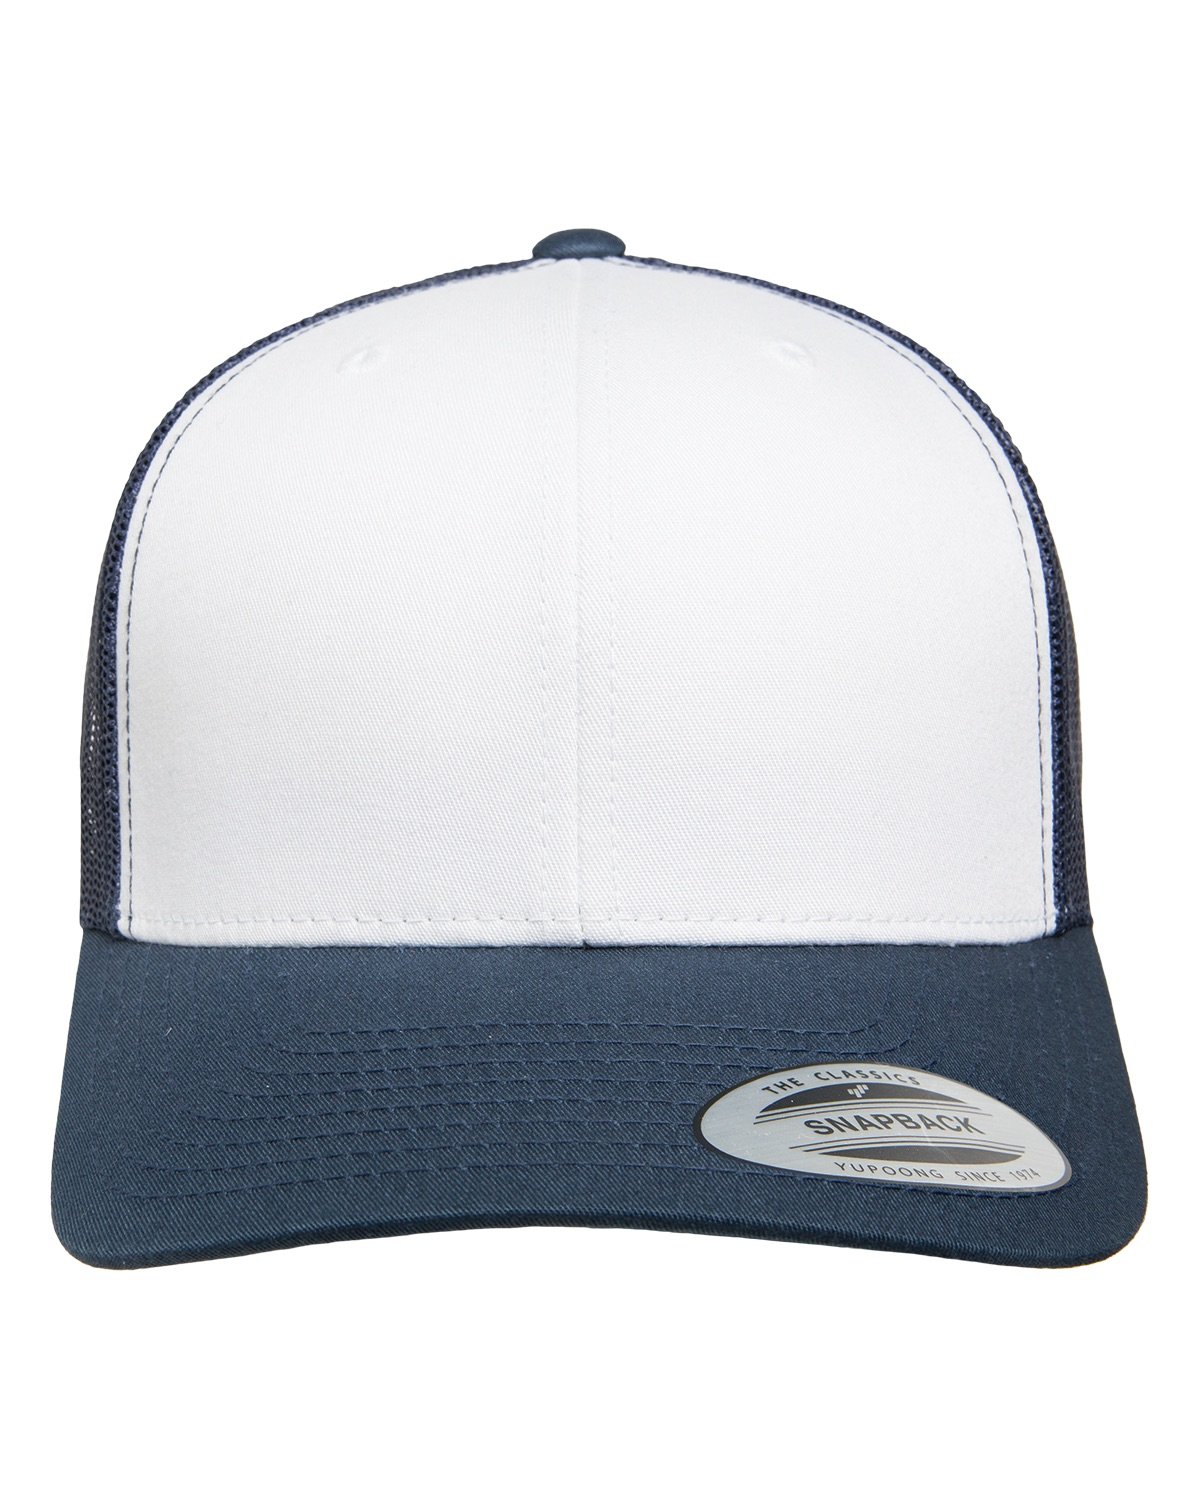 White Trucker Hat - Classic Style for Any Occasion